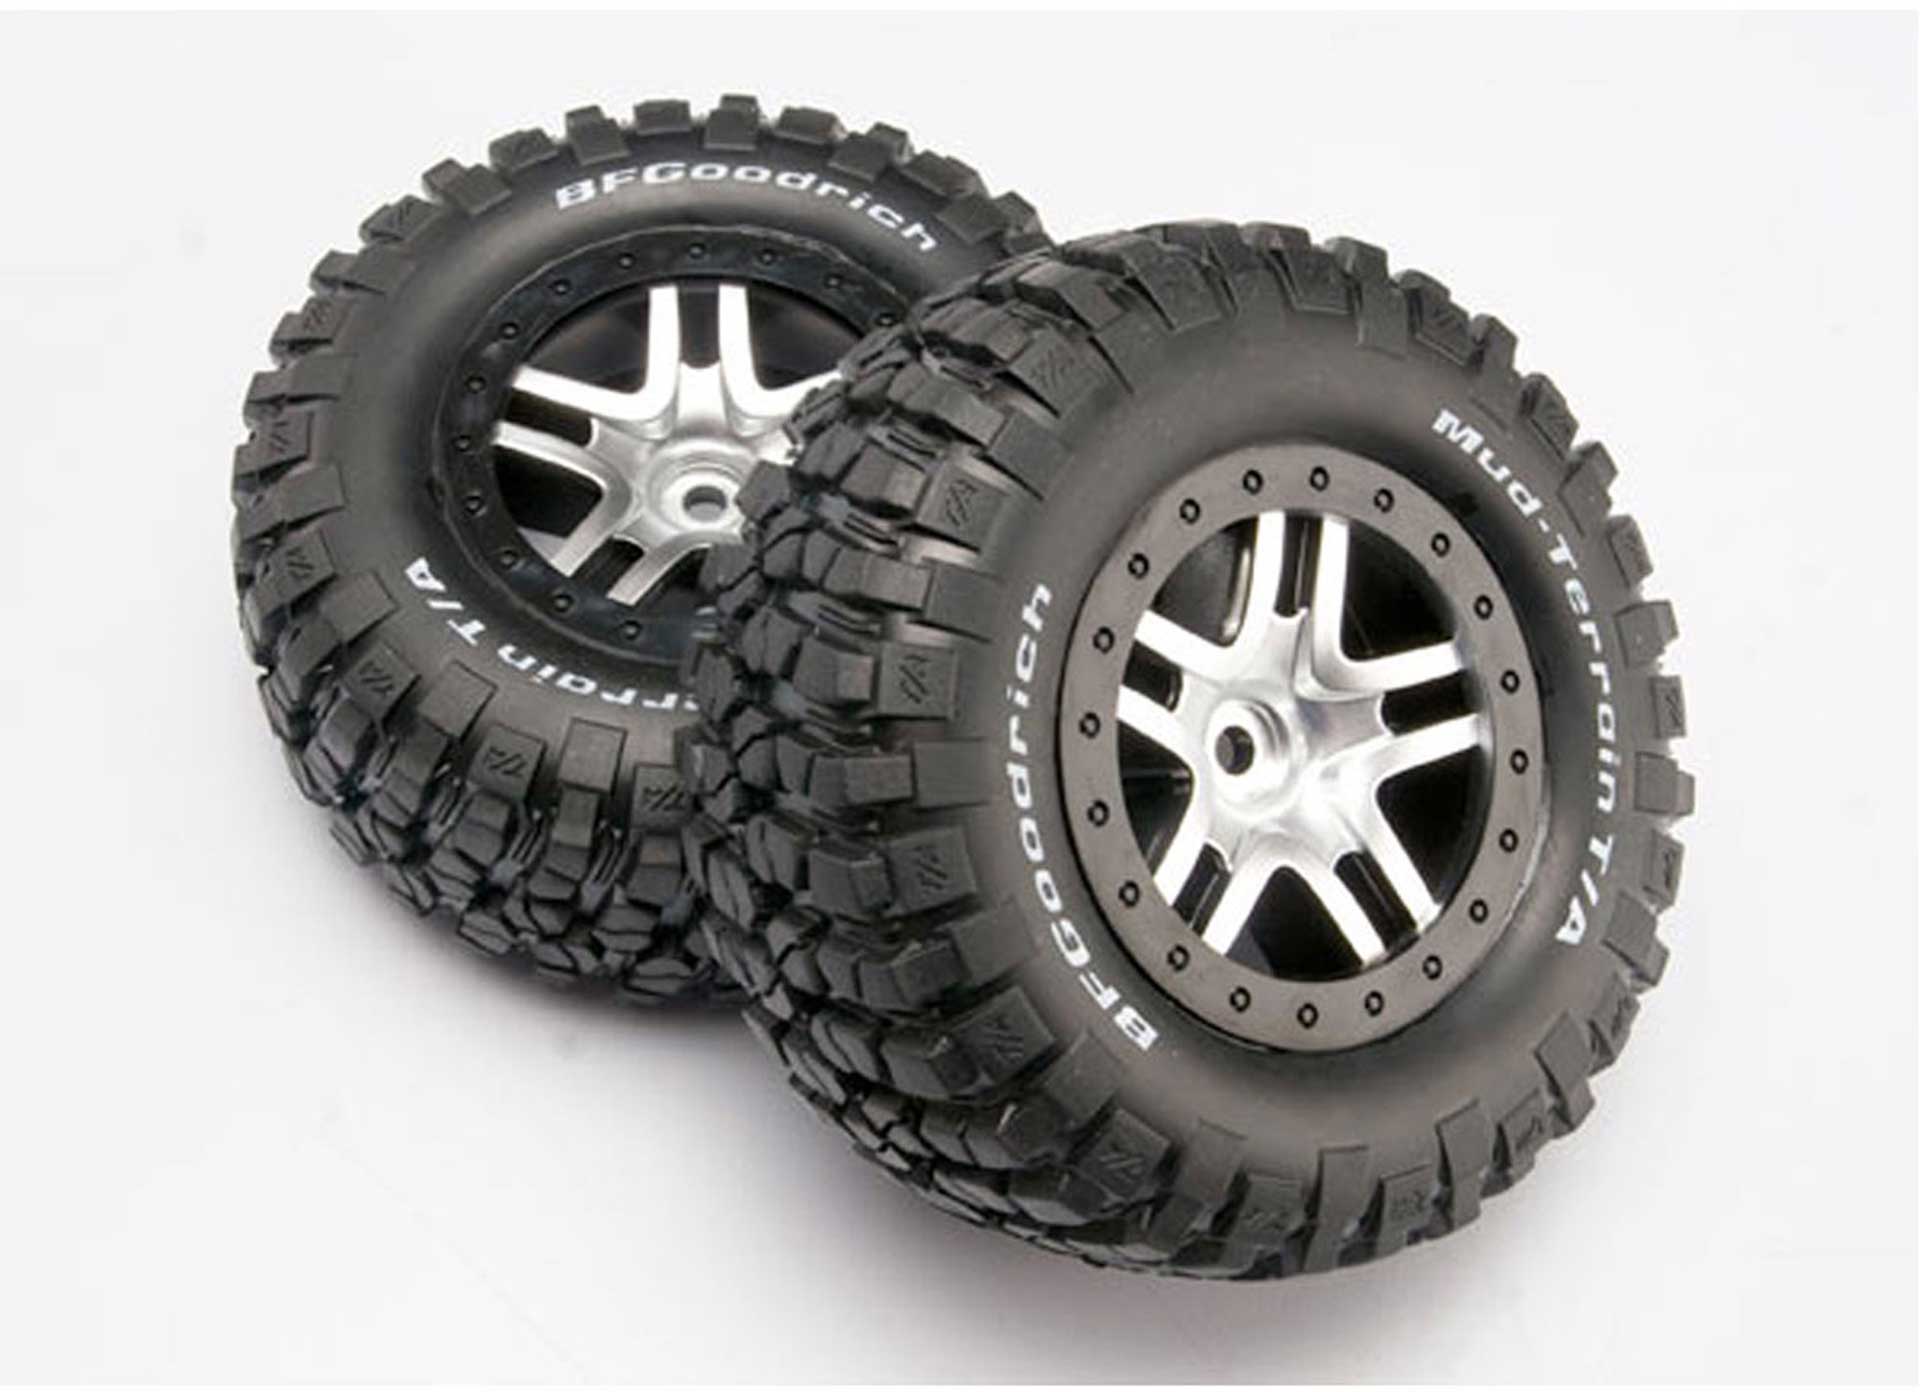 TRAXXAS ROUES MONTEES COLLEES BF GOODRICH POUR 4X4 AV/ARR-4X2 ARRIERE (2)